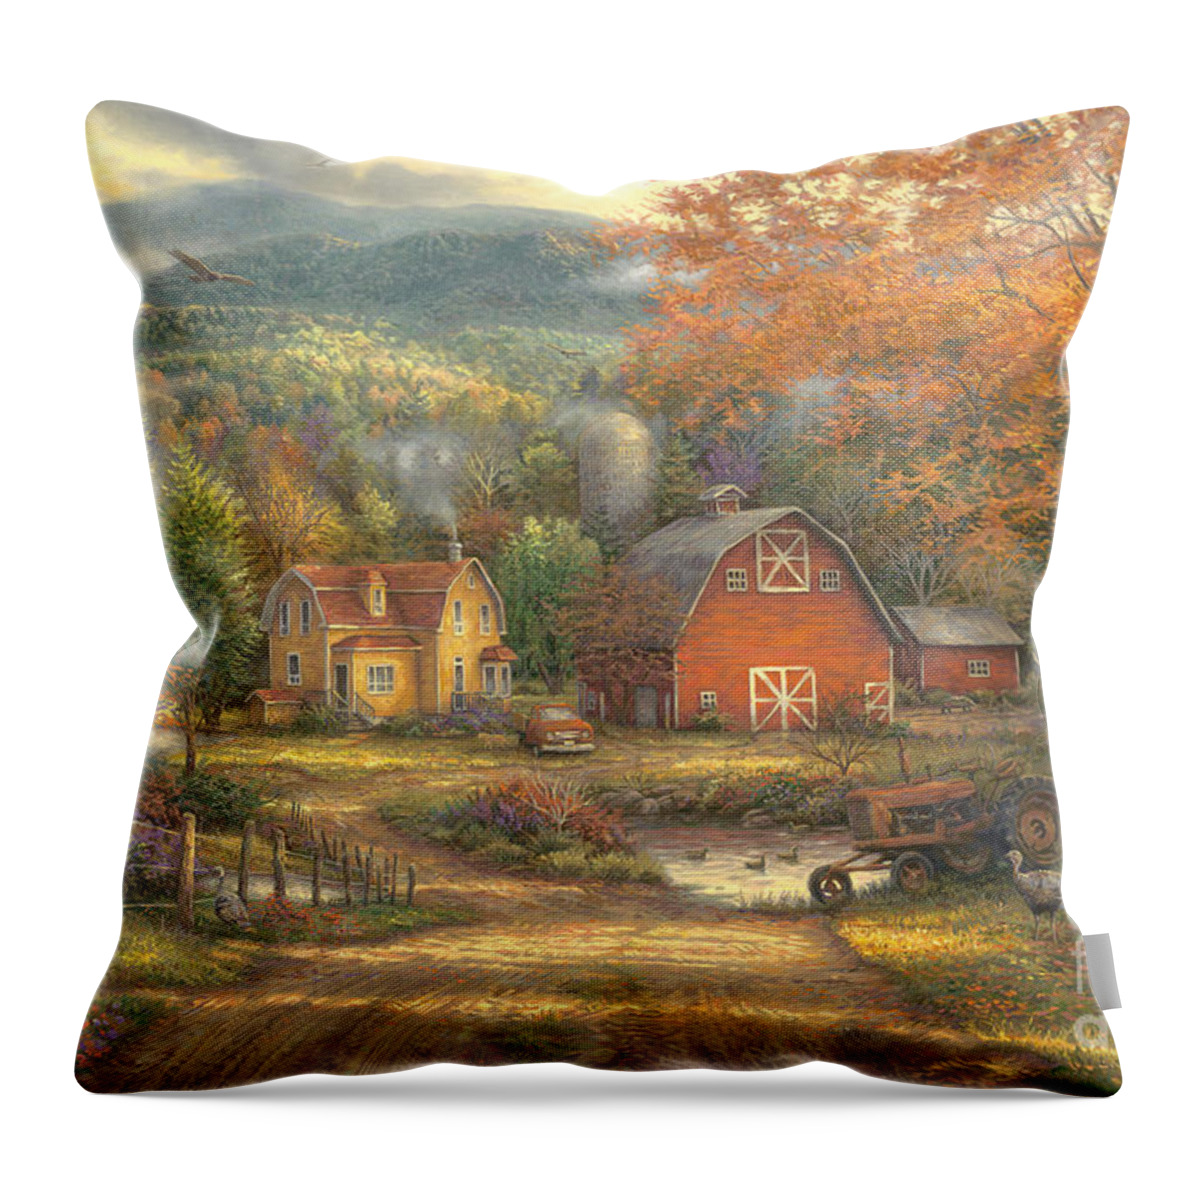 Inspirational Picture Throw Pillow featuring the painting Country Roads Take Me Home by Chuck Pinson